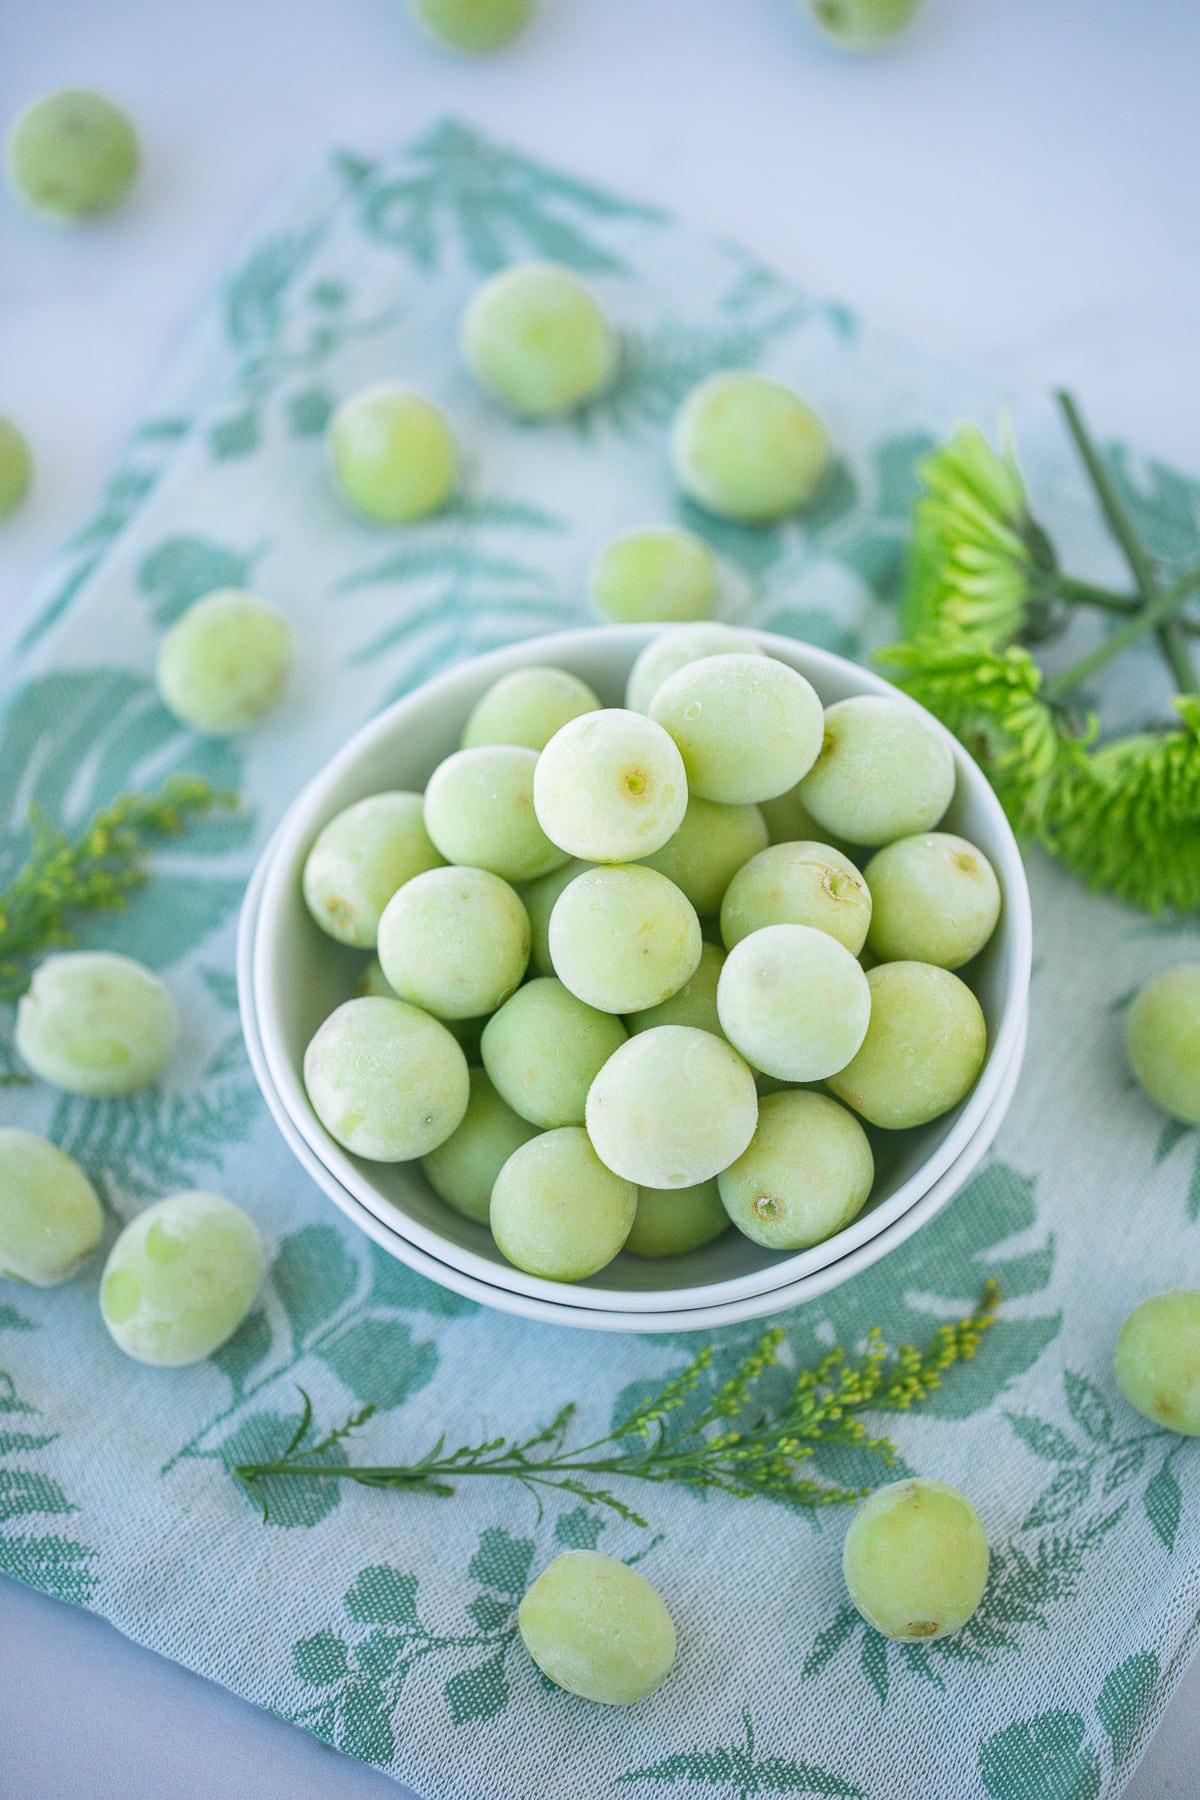 How to Make Frozen Grapes (No Added Sugar or Sugared)